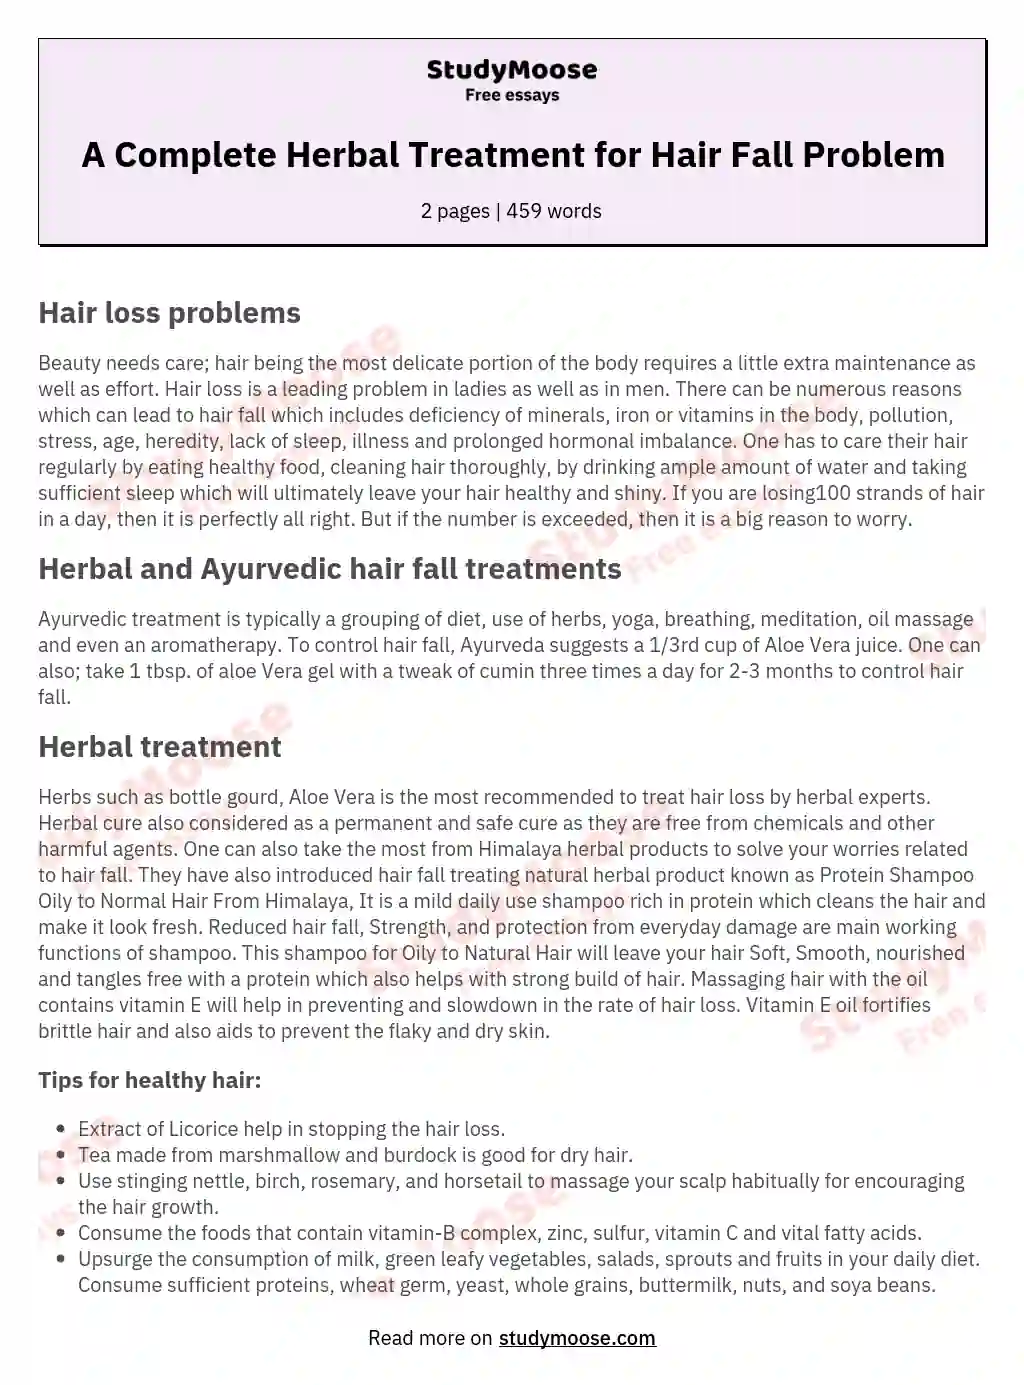 A Complete Herbal Treatment for Hair Fall Problem